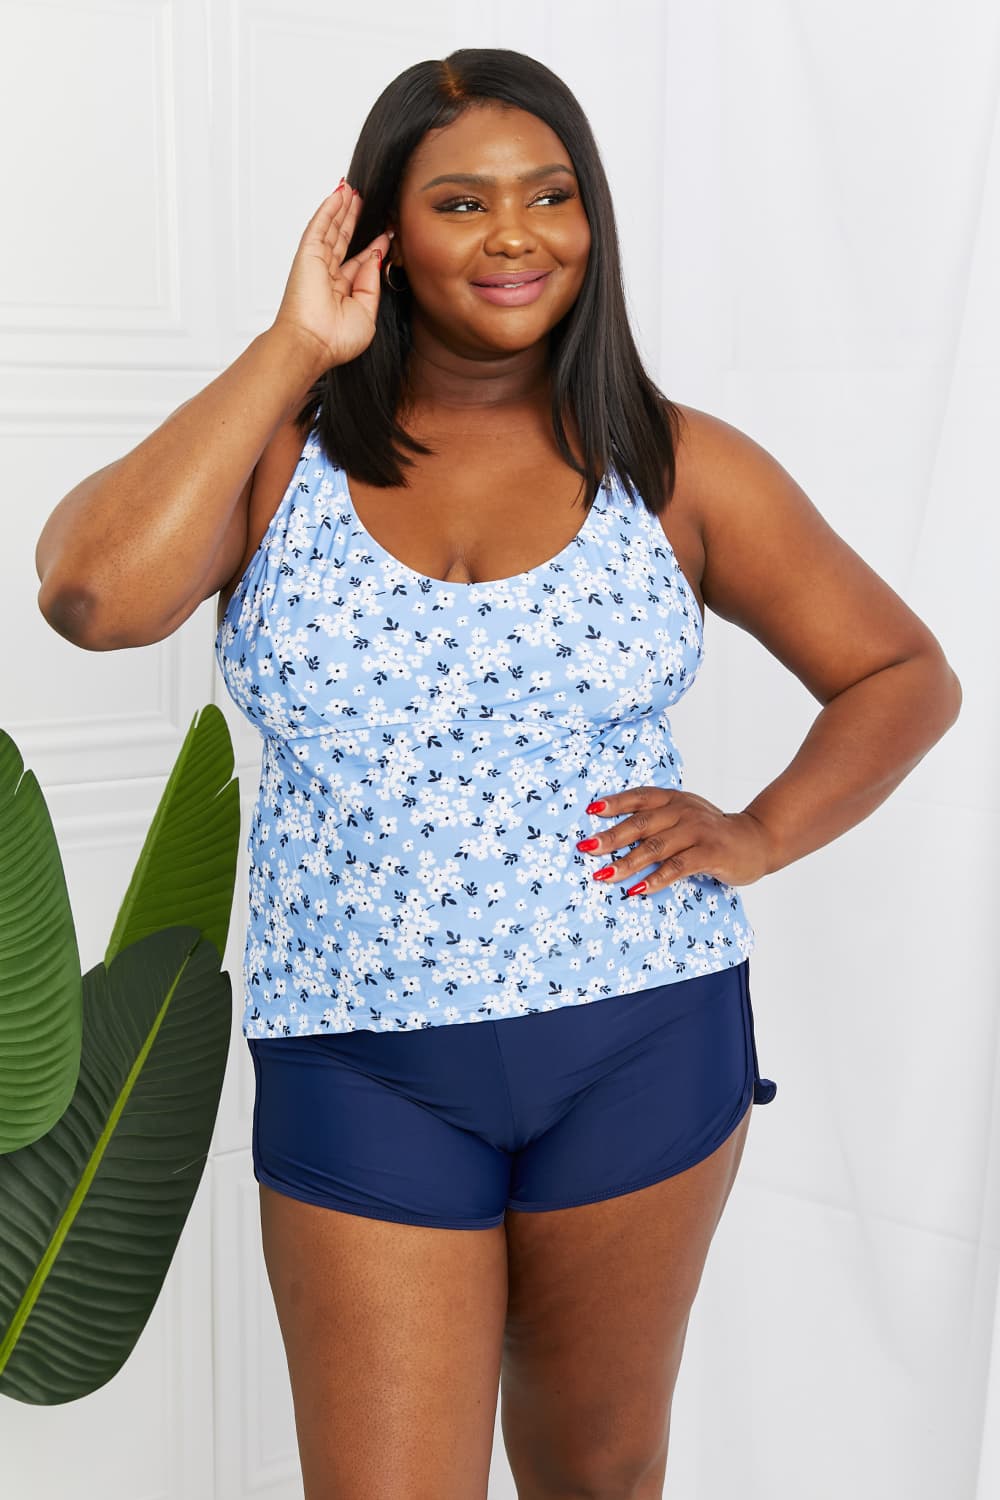 Marina West Swim By The Shore Full Size Two-Piece Swimsuit in Blossom Navy - The Fashion Unicorn